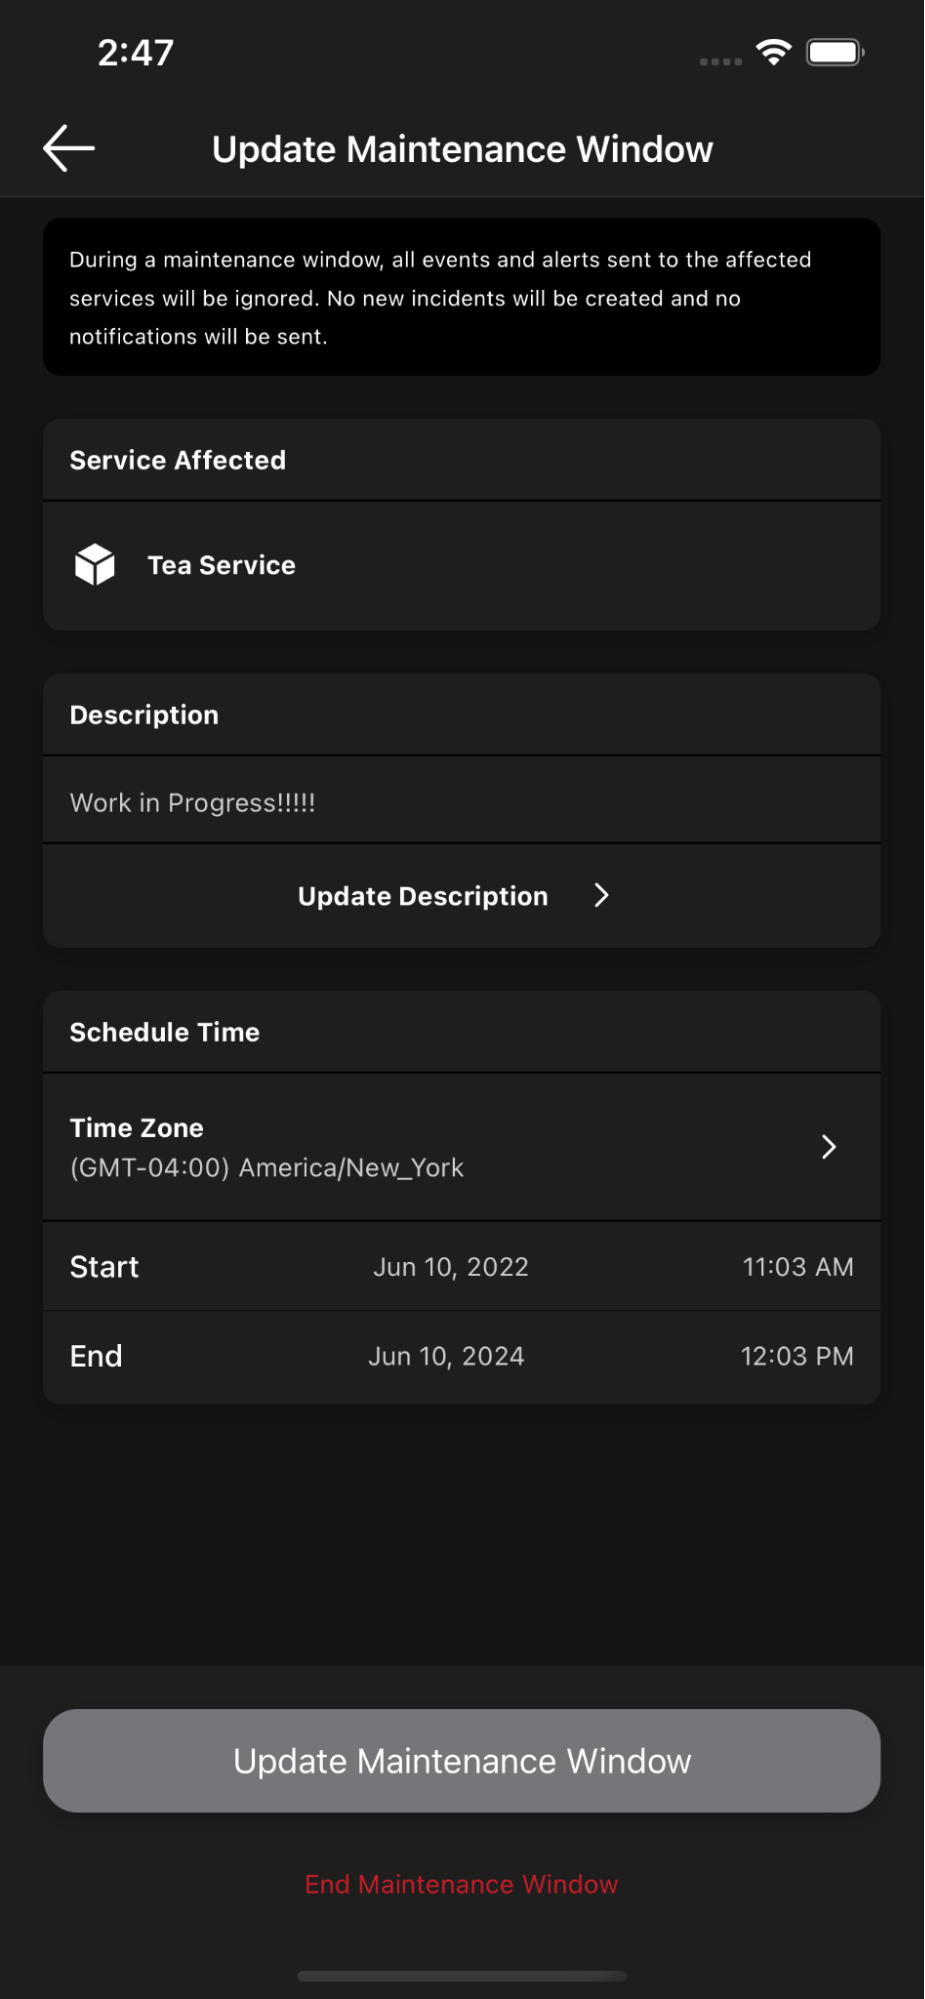 Update a maintenance window in the mobile app